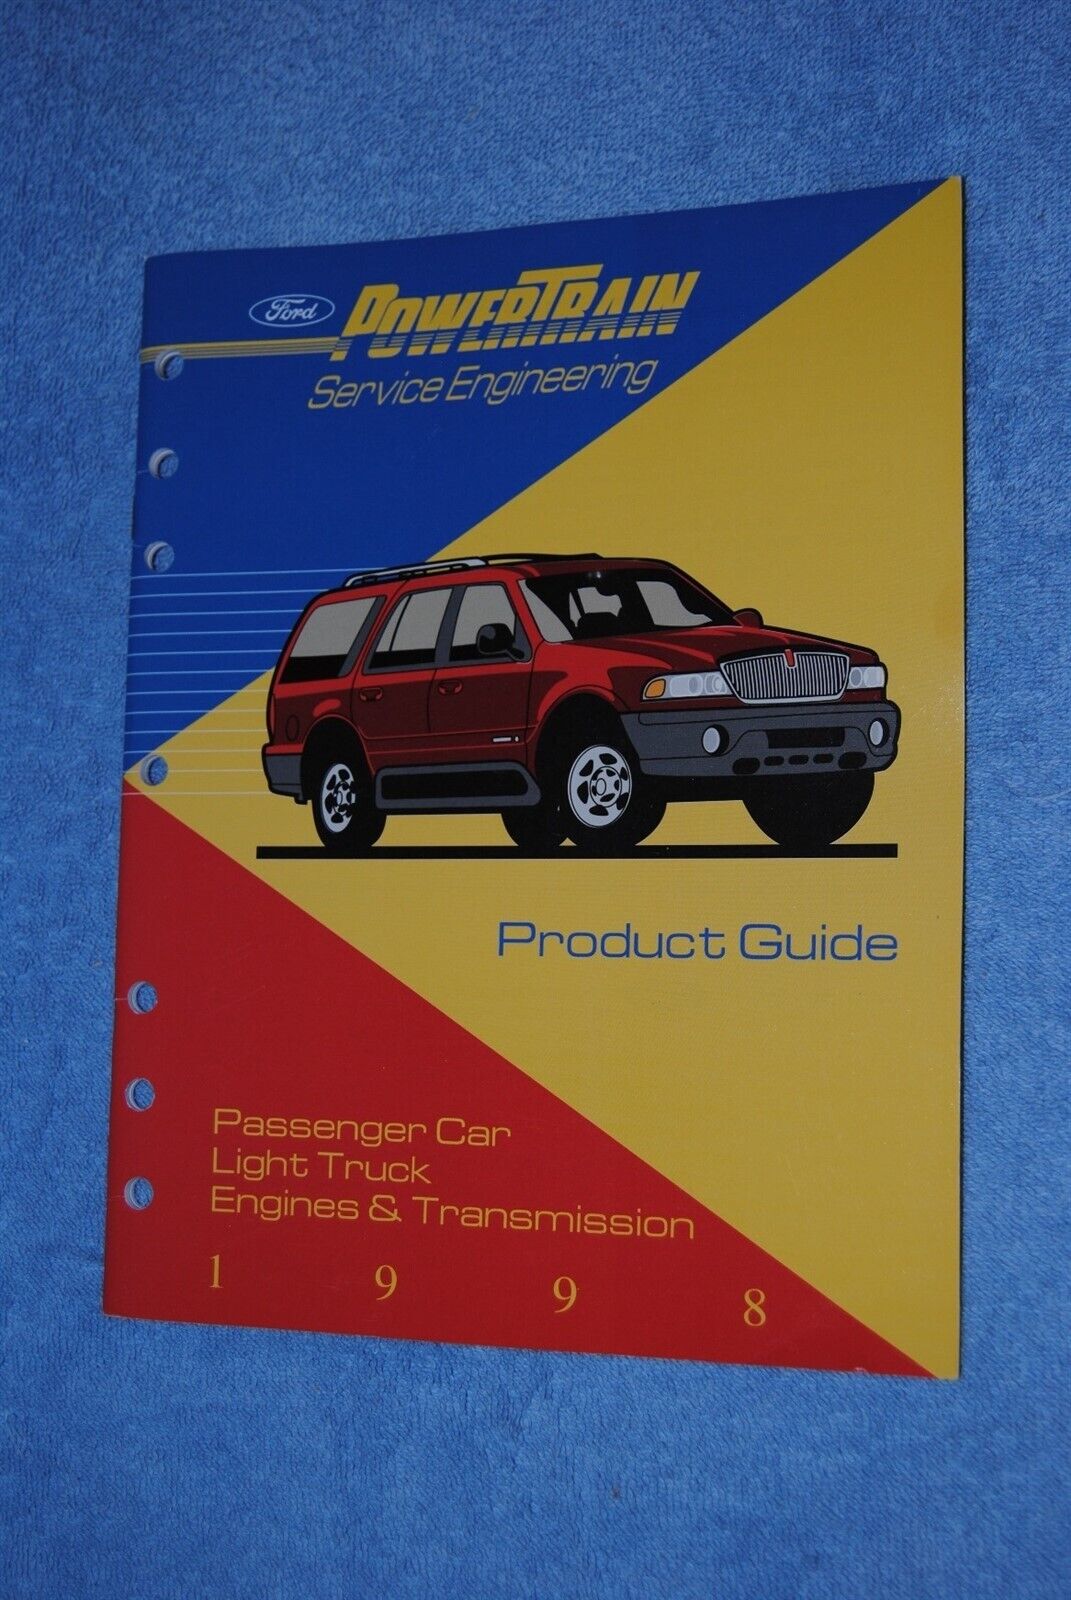 1998 Ford Powertrain Service Engineering Product Guide Engines & Transmissions